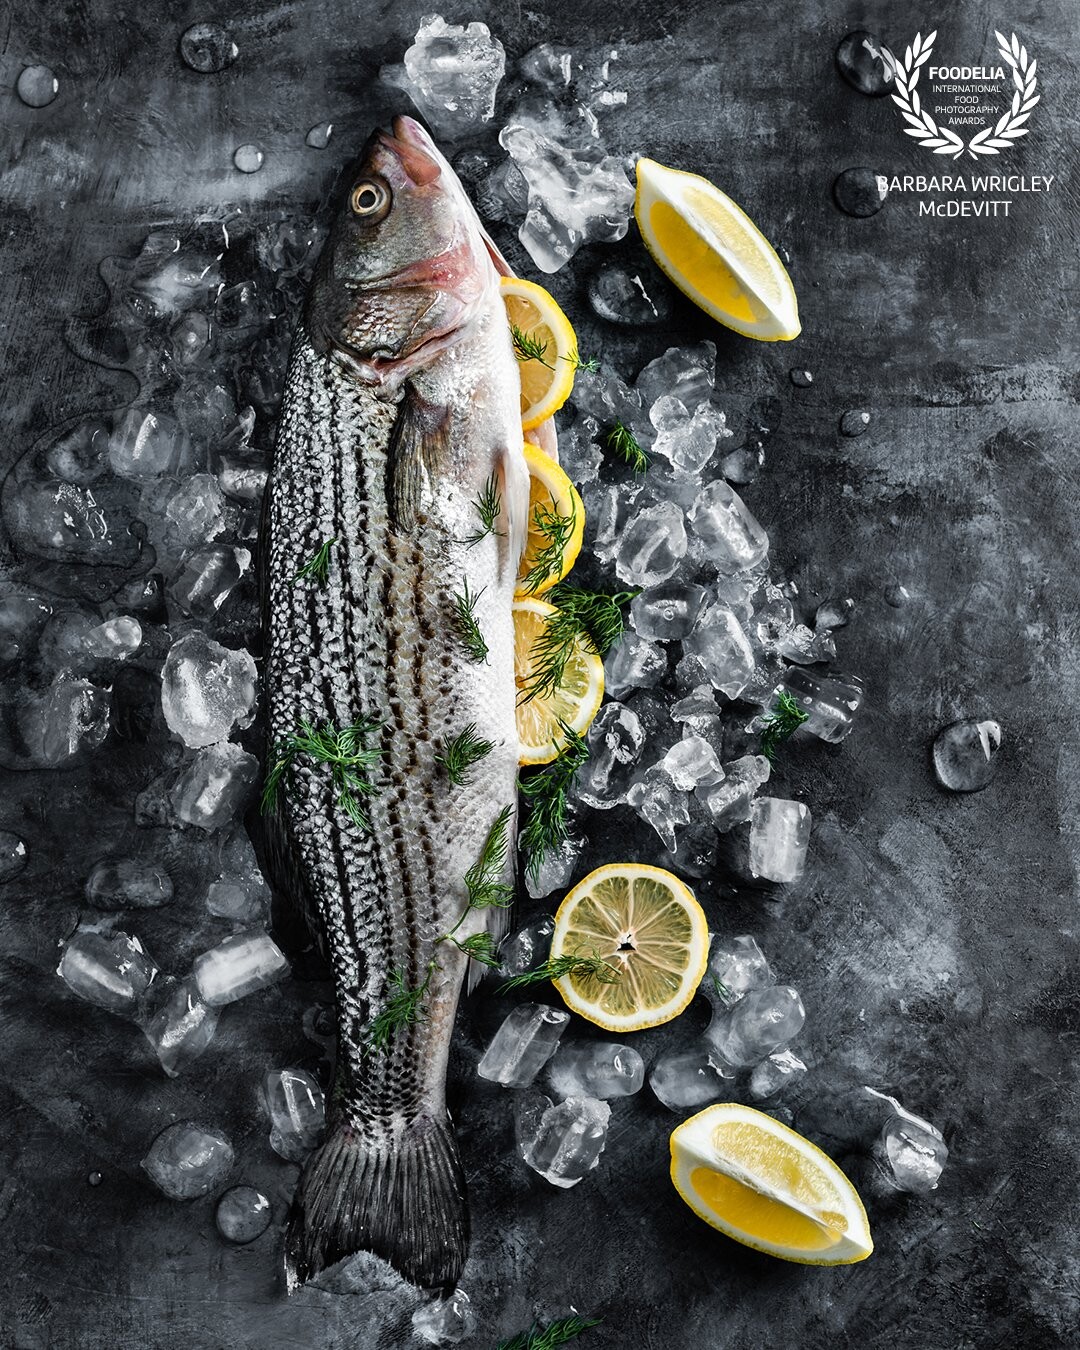 Black sea bass is alleged to be the tastiest fish in the ocean. The flavor is fresh and light, receptive to almost any combination of flavors and techniques.  In the pre-preparation I used parsley and lemon.  Shot with a Nikon D-810 and a Profoto B-1 side lighting.